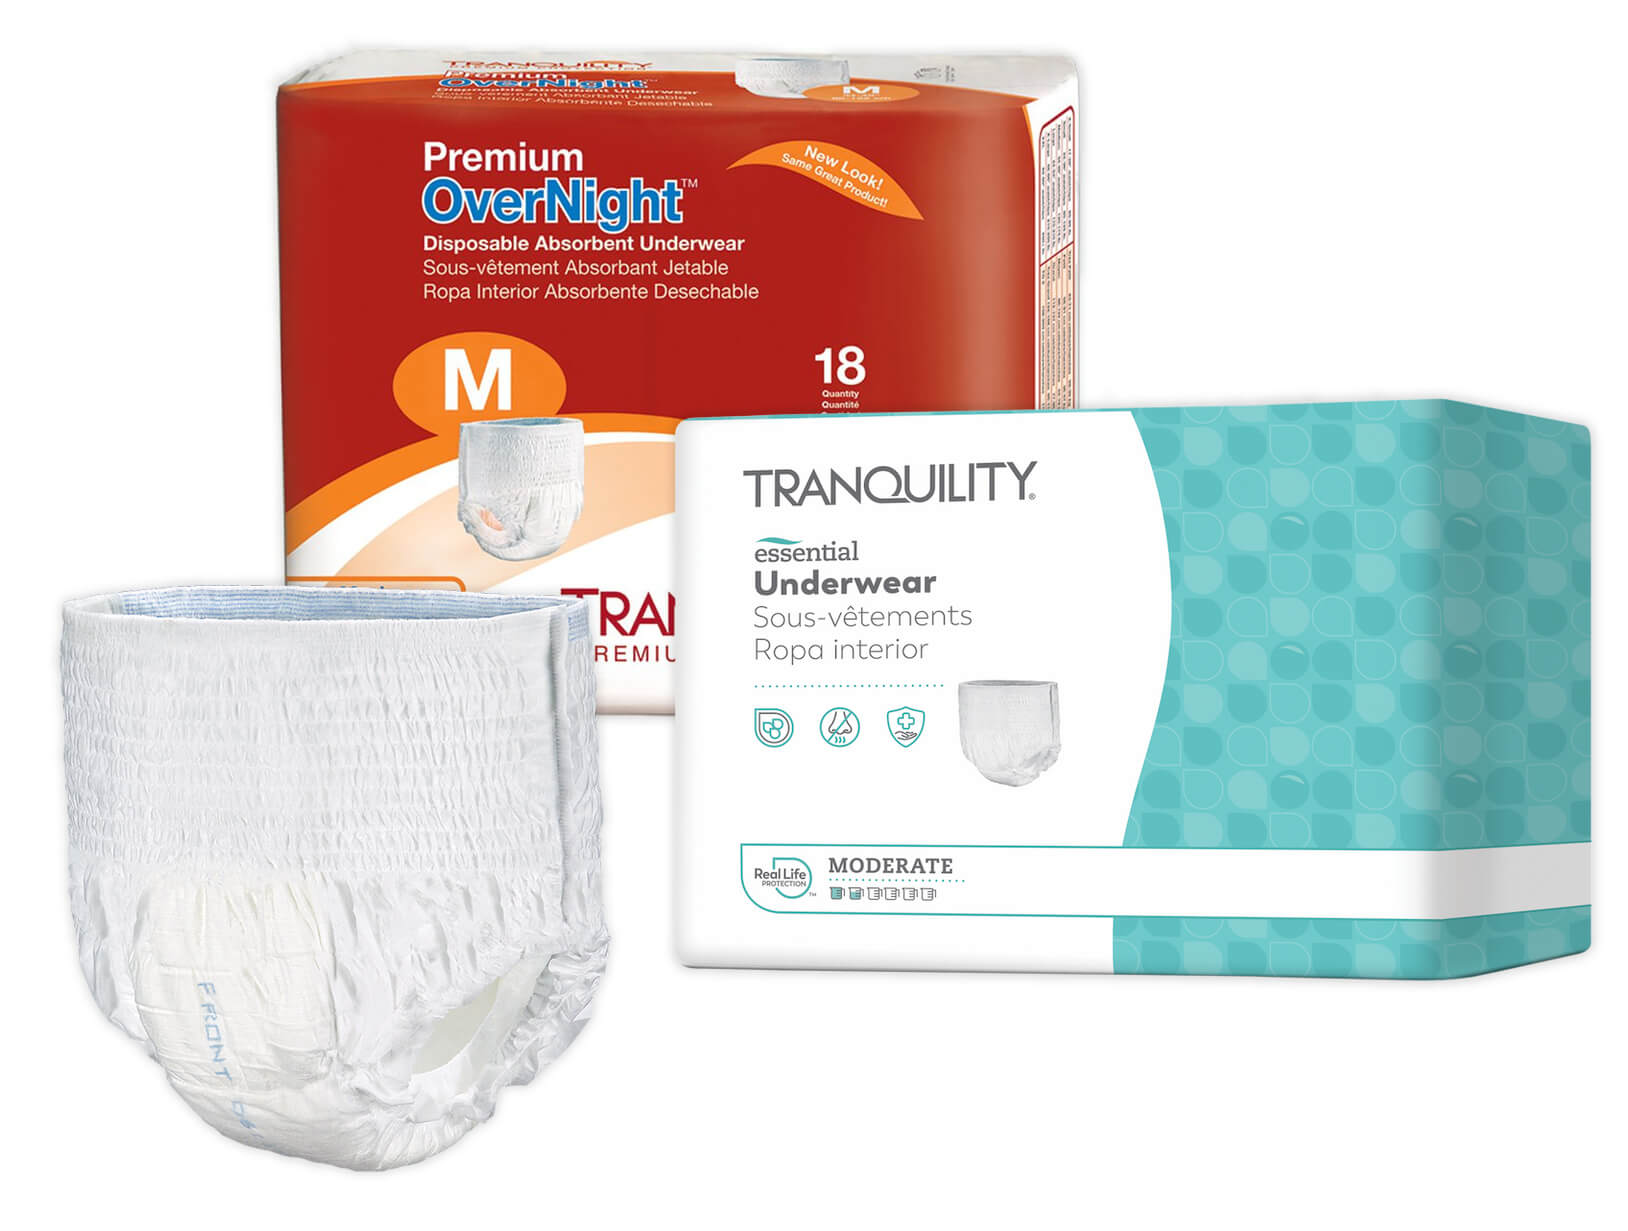 Tranquility Bariatric Tab-Style Adult Incontinence Briefs